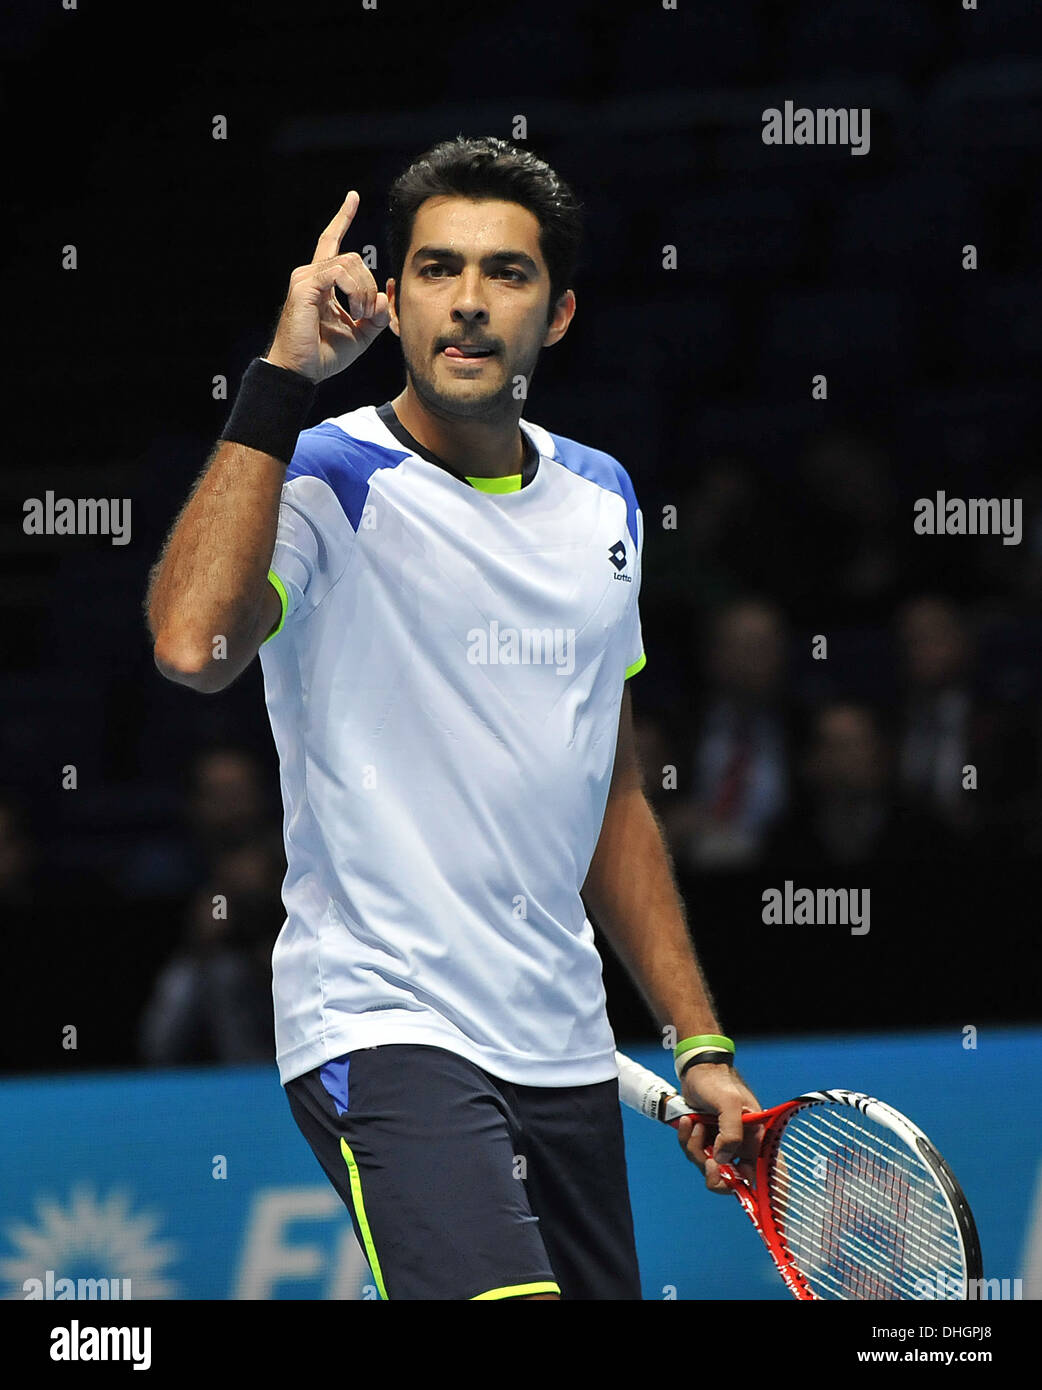 Aisam-Ul-Haq Qureshi in action on day 4 of the Barclays ATP World Finals  doubles match Stock Photo - Alamy